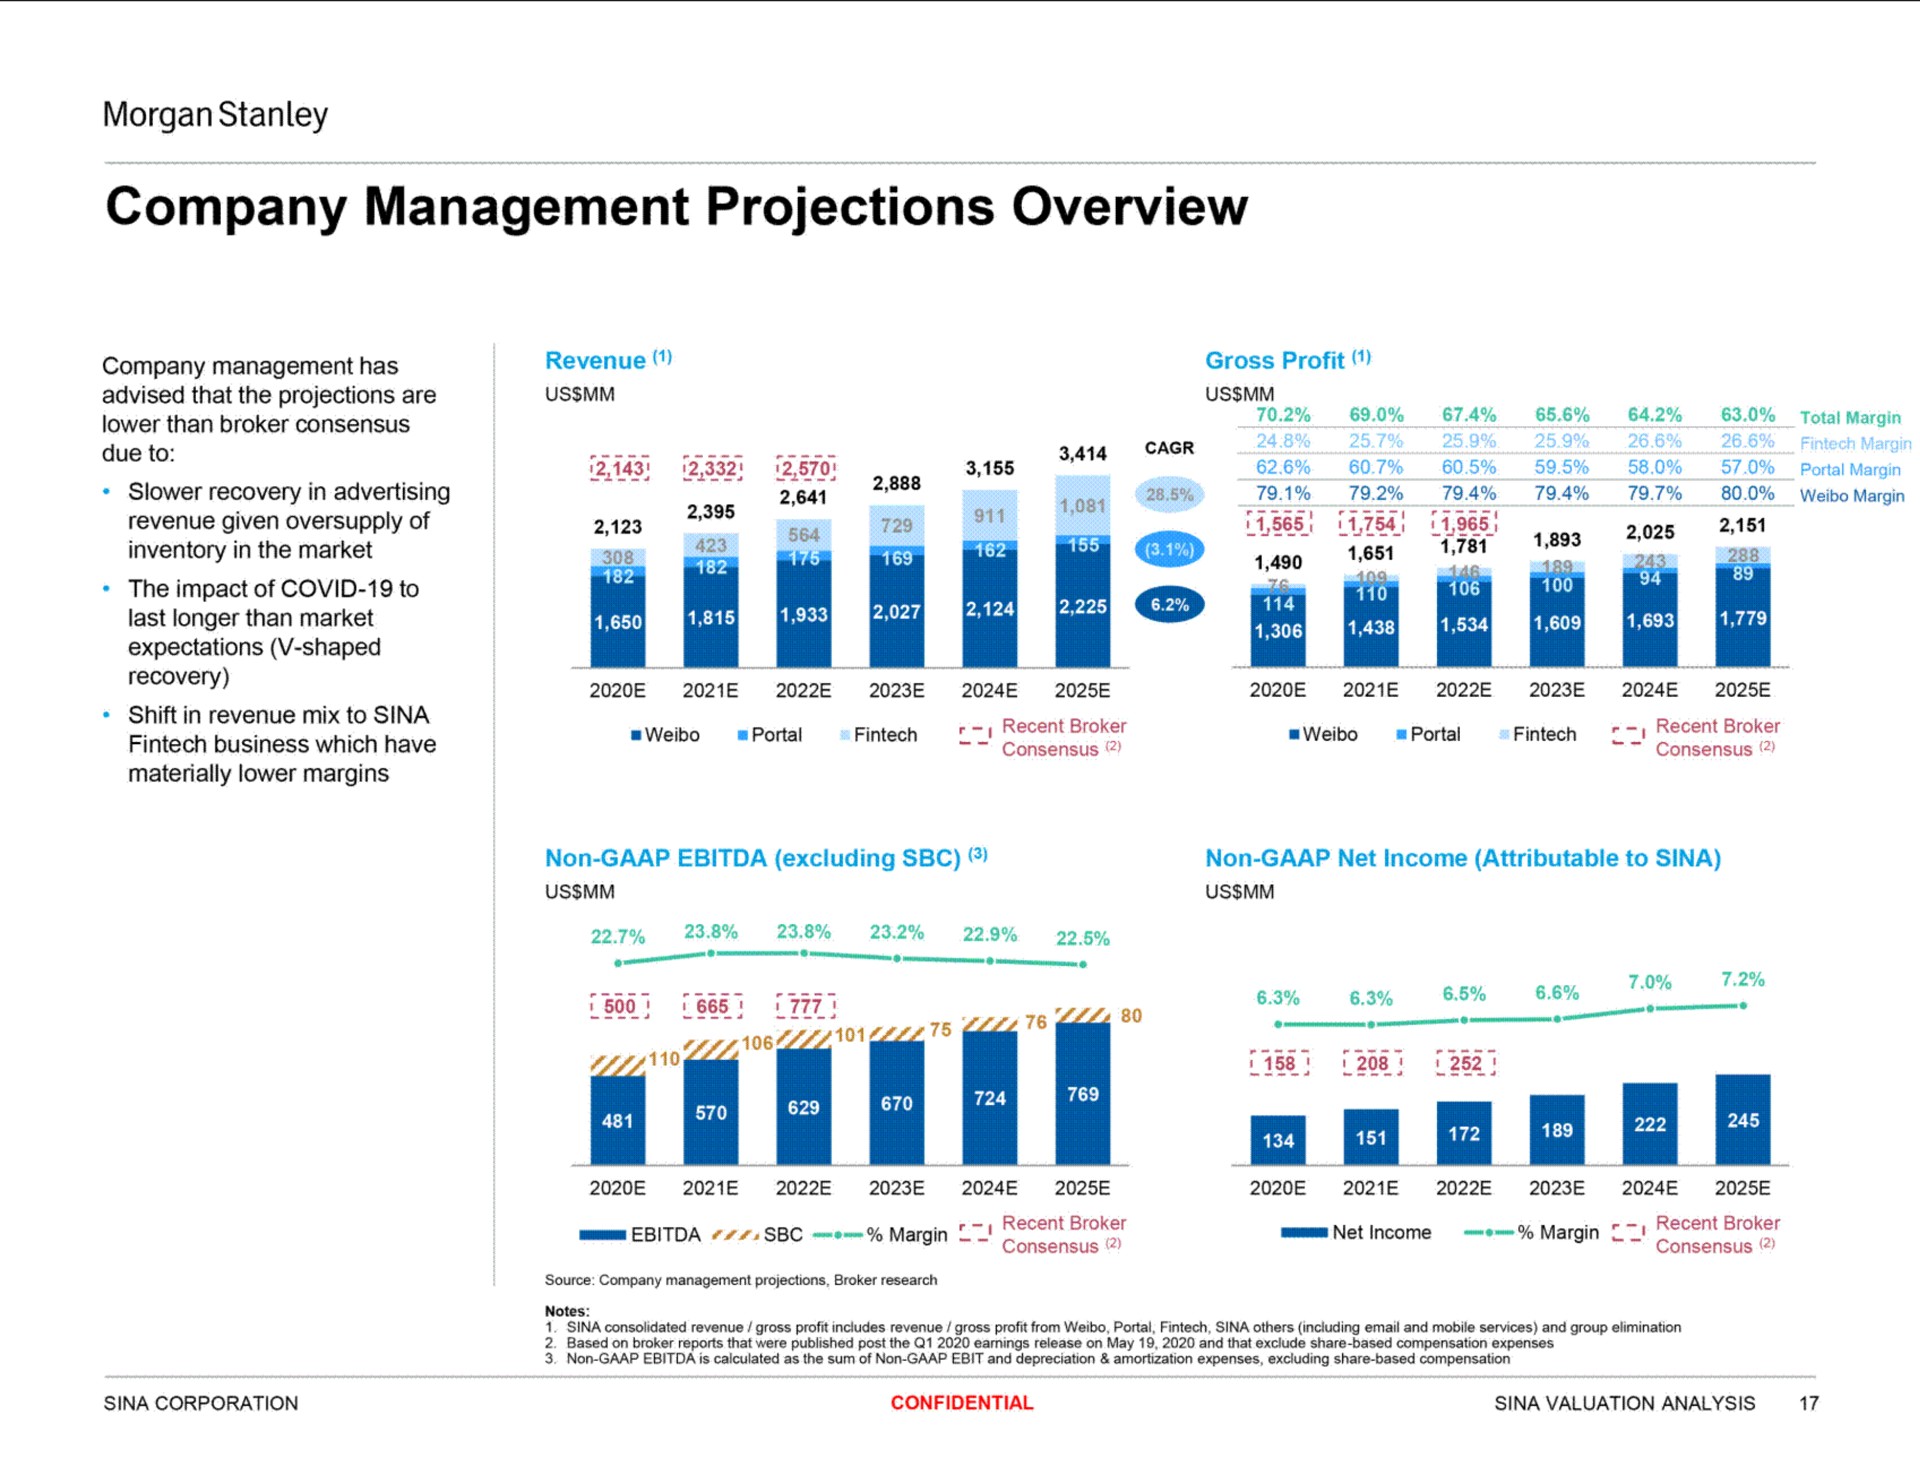 company management projections overview | Morgan Stanley